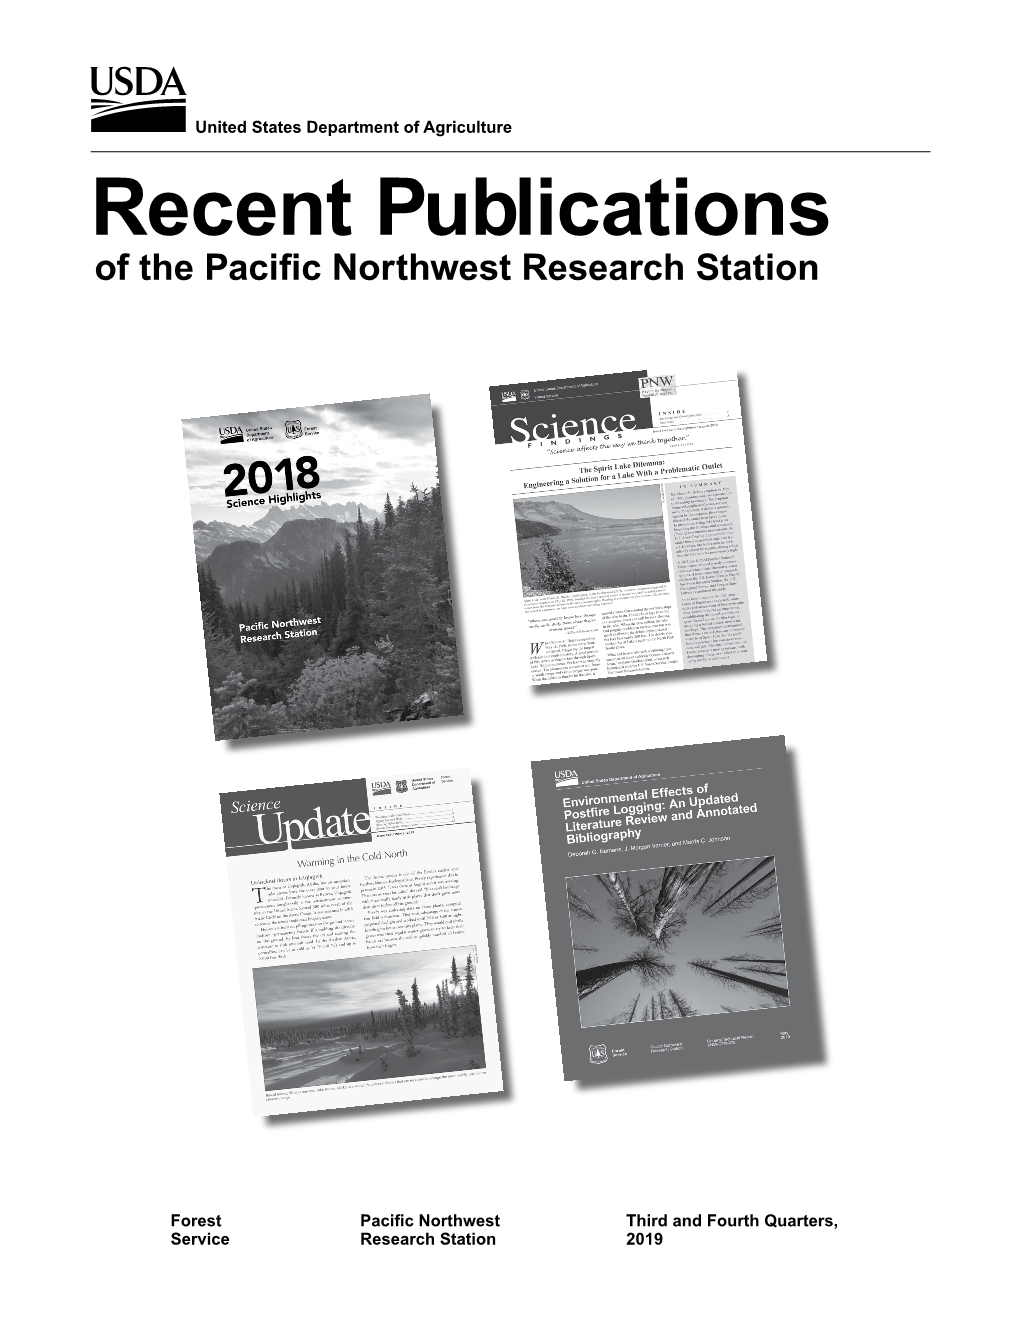 Recent Publications of the Pacific Northwest Research Station